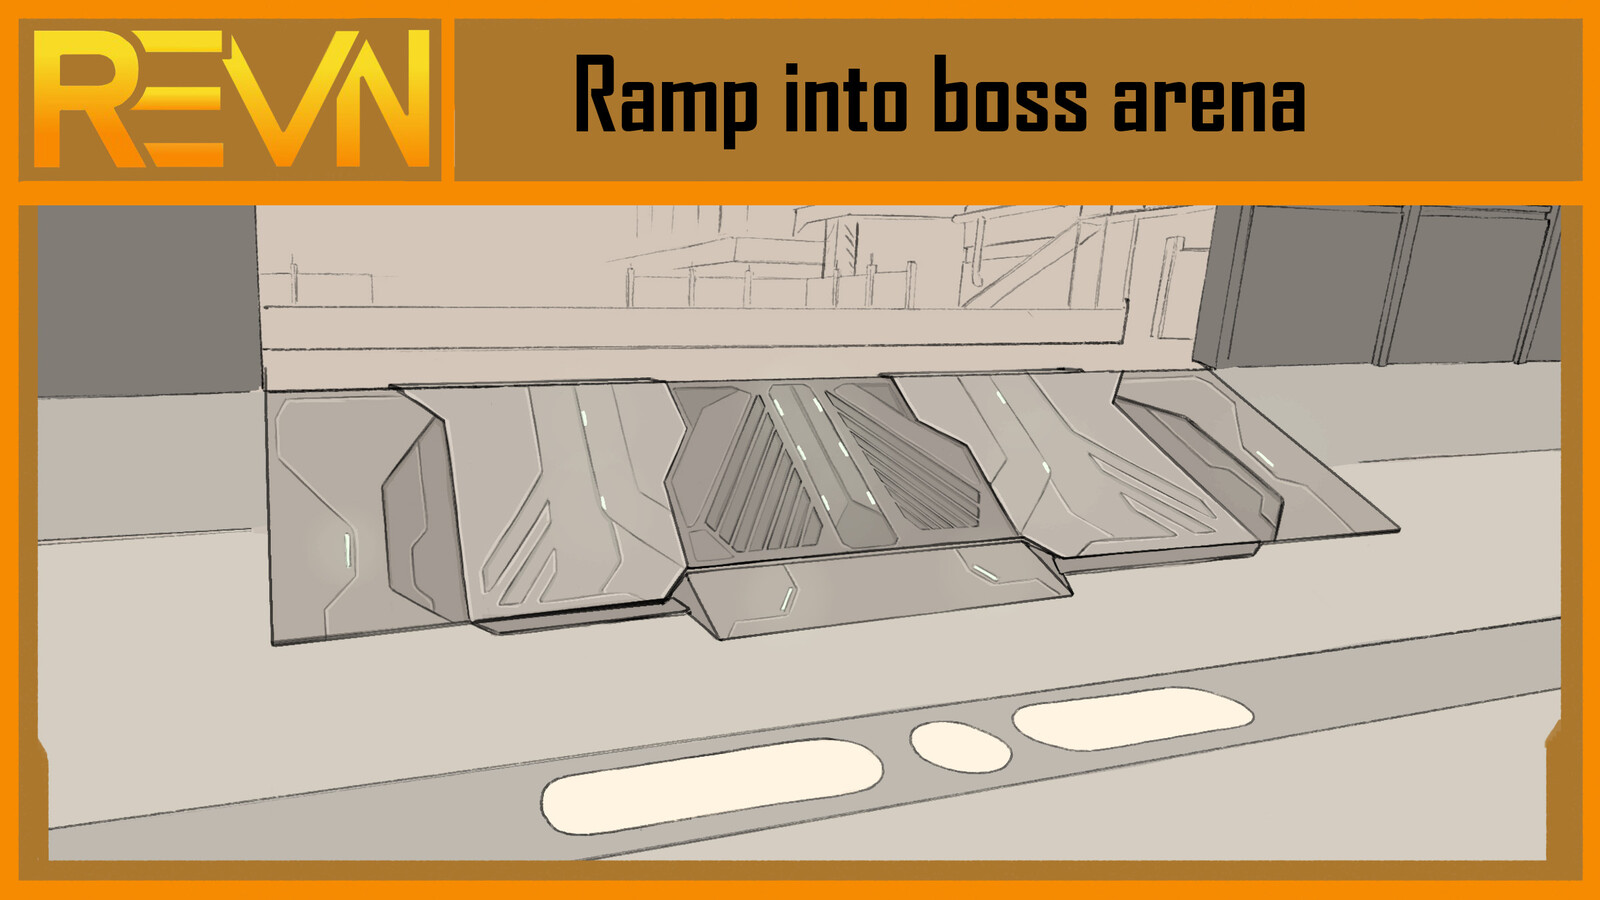 Design concept for a ramp leading into a boss arena, the designs in the ramp were meant to have similar motifs to the boss and the boss arena.